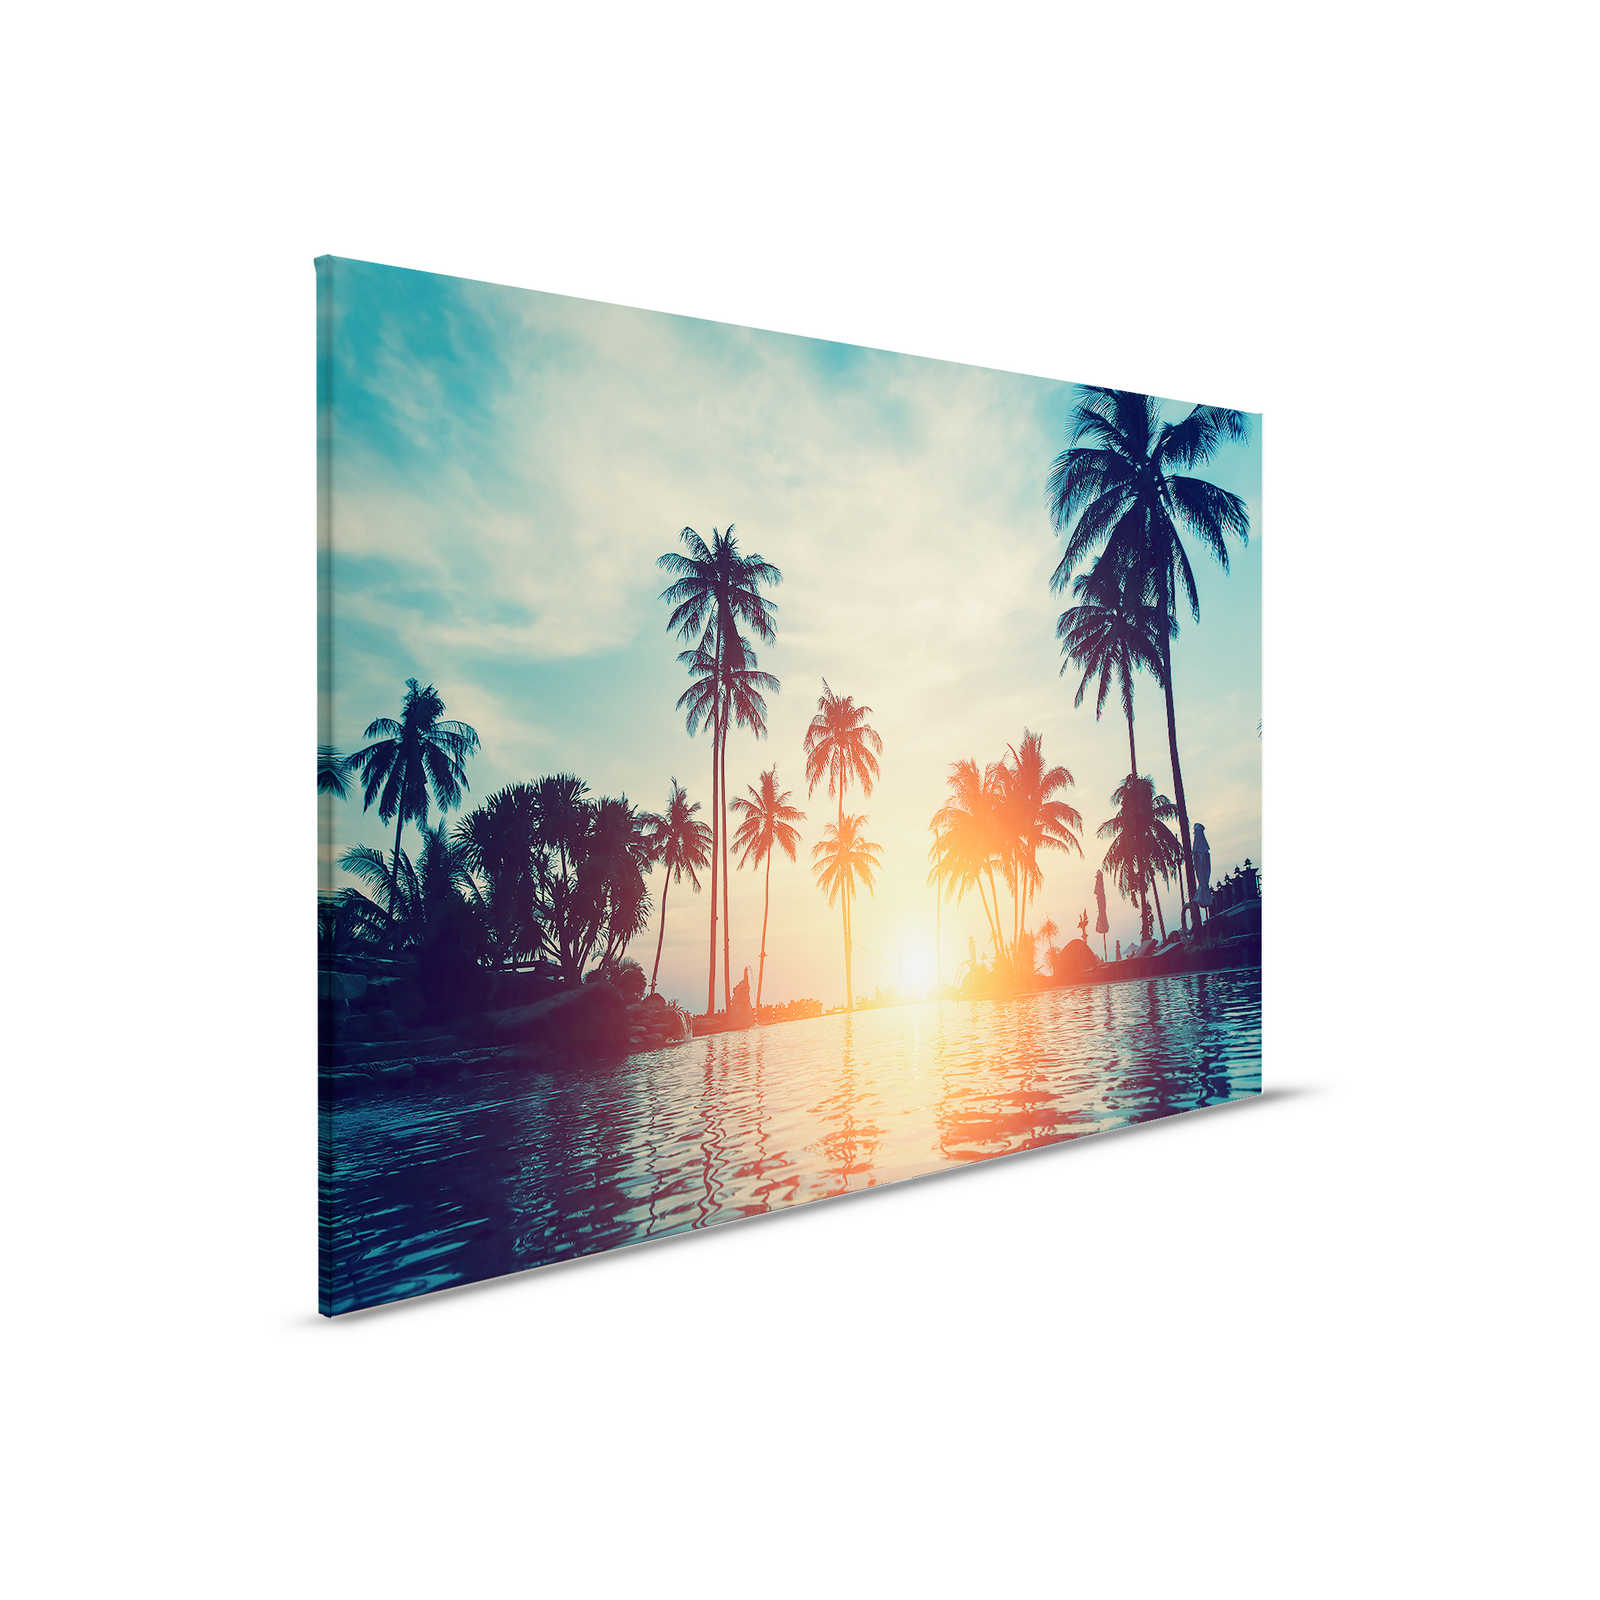         Canvas painting with palm trees on the water in the sunset - 0.90 m x 0.60 m
    